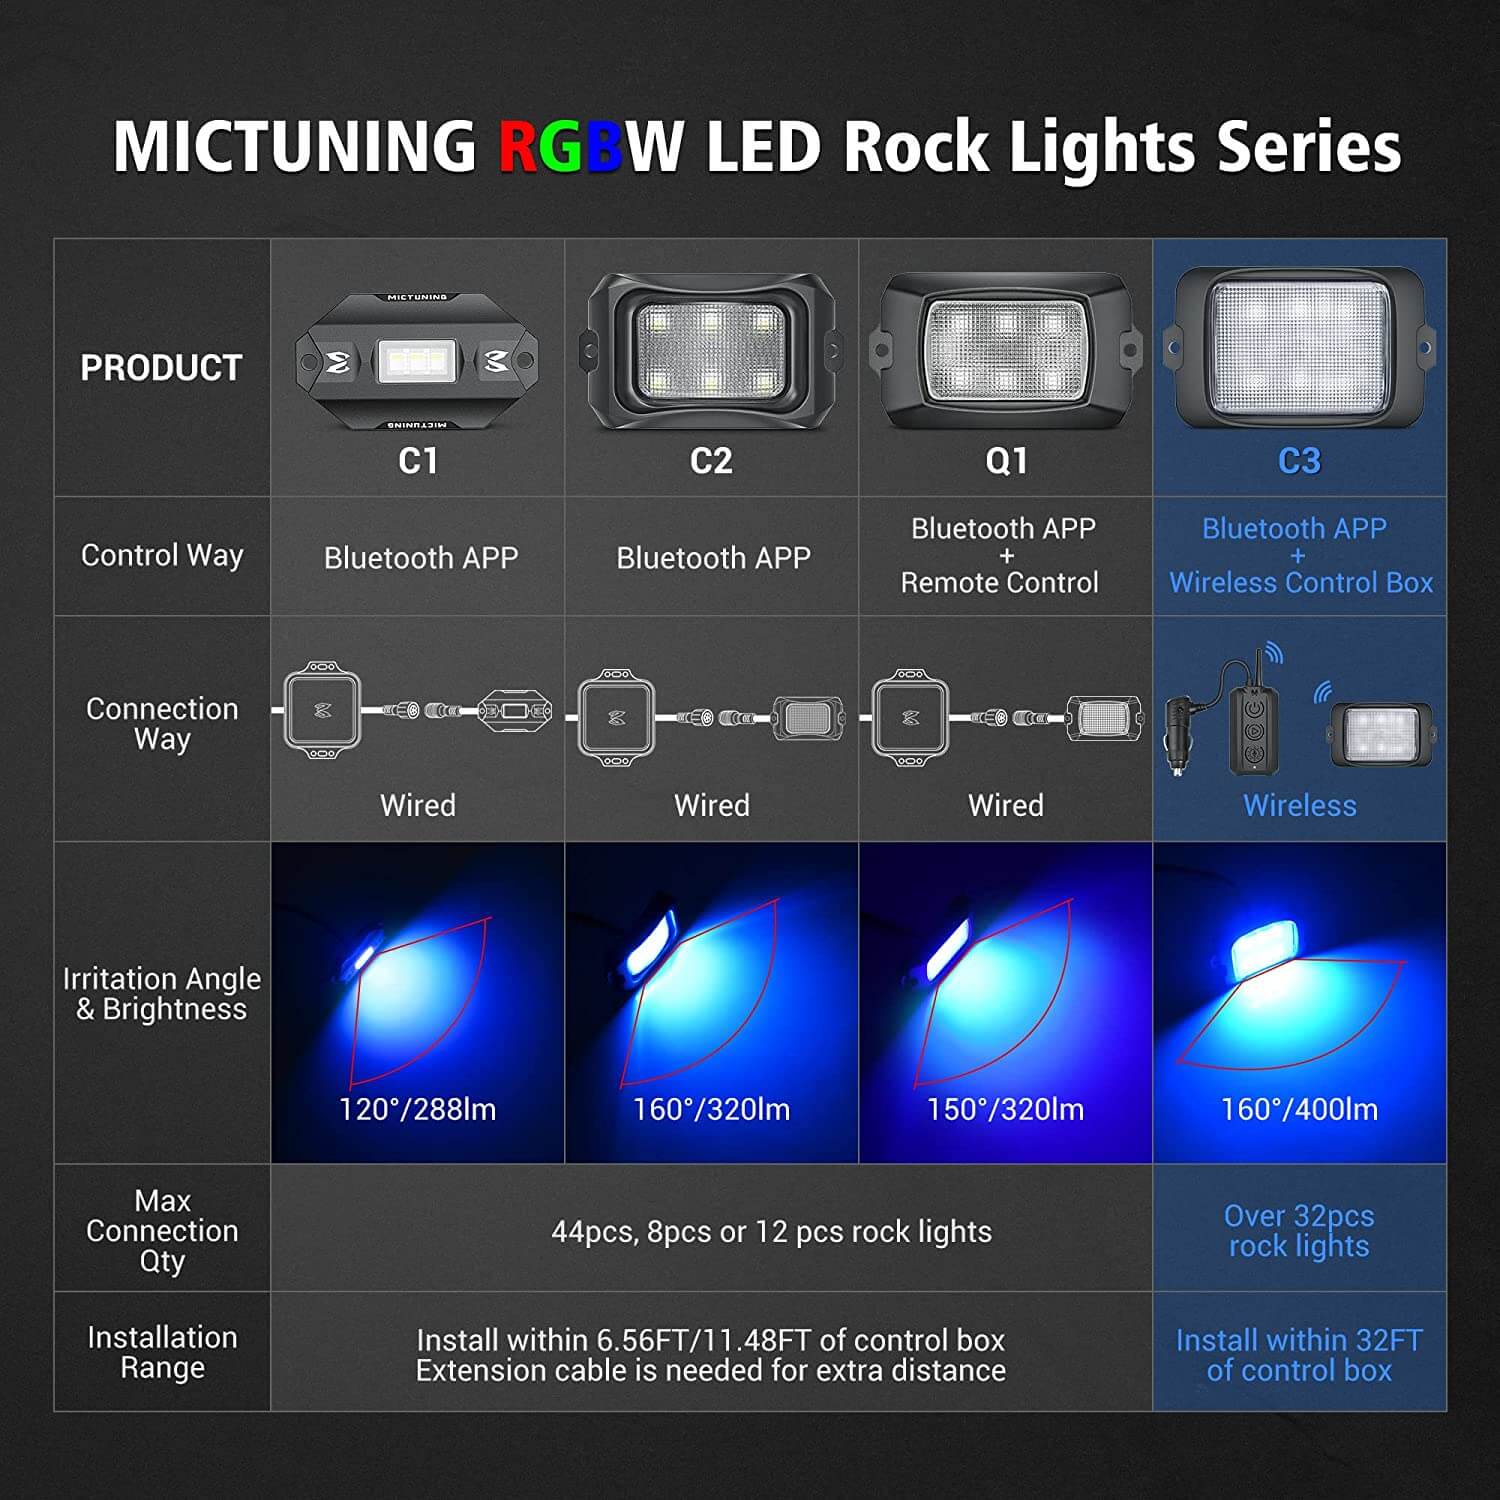 C3 Extensible RGBW LED Rock Lights - 8 Pods Wireless Control Multi-Color Neon Underglow Lights